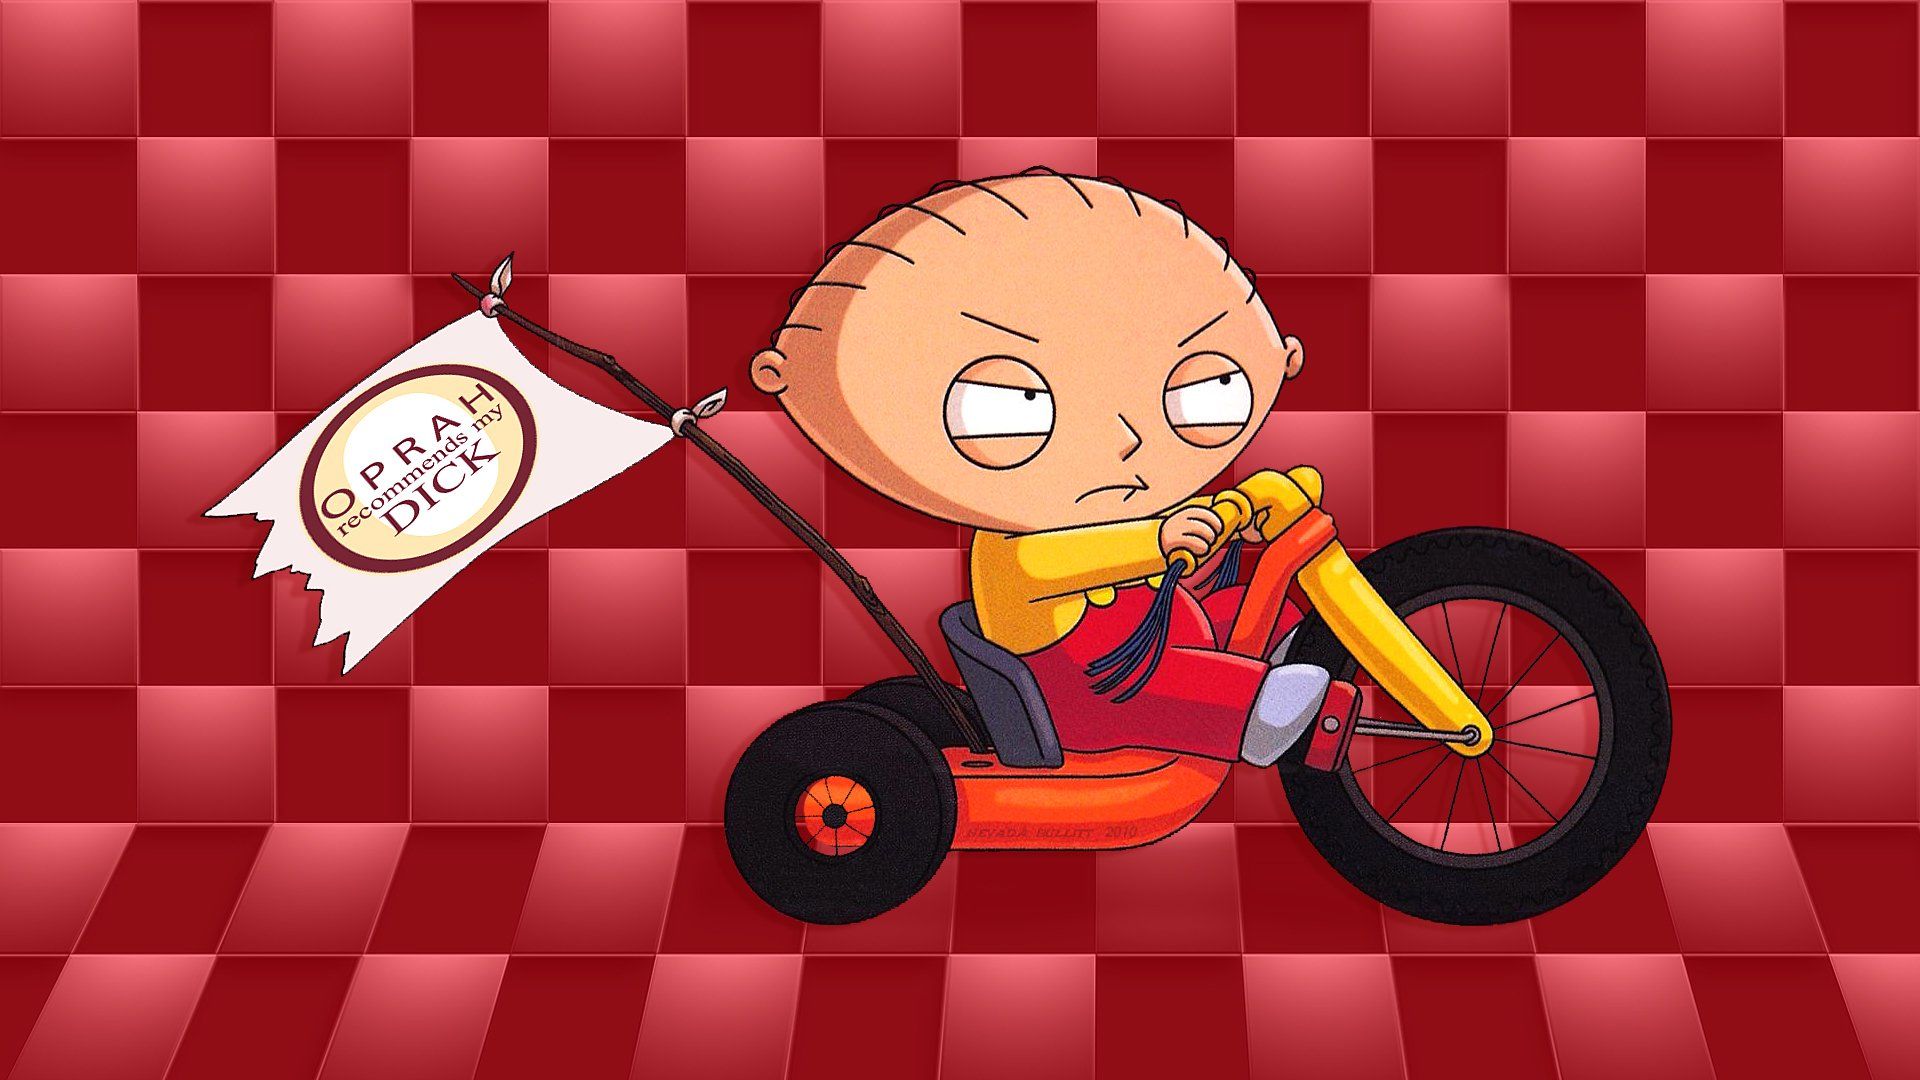 Family Guy HD Wallpaper and Background Image